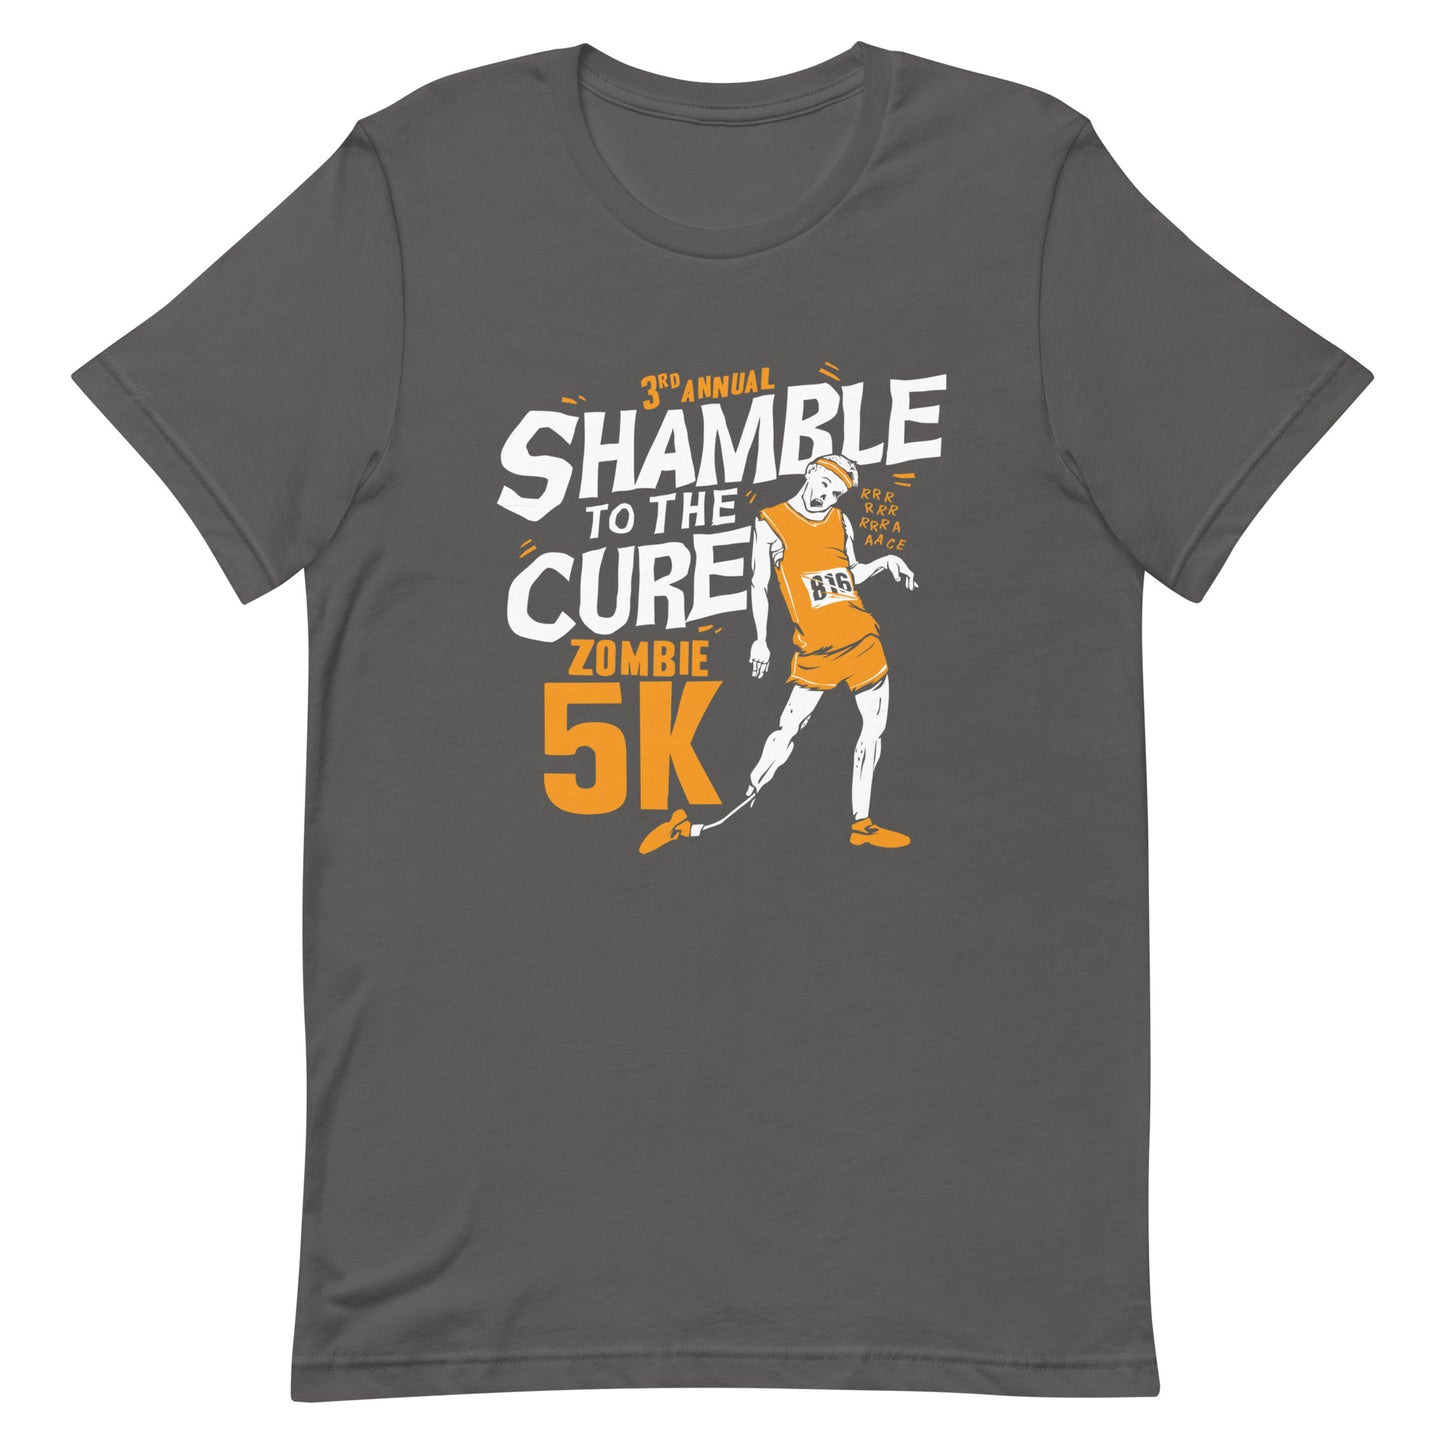 Shamble To The Cure Zombie 5K Men's Signature Tee